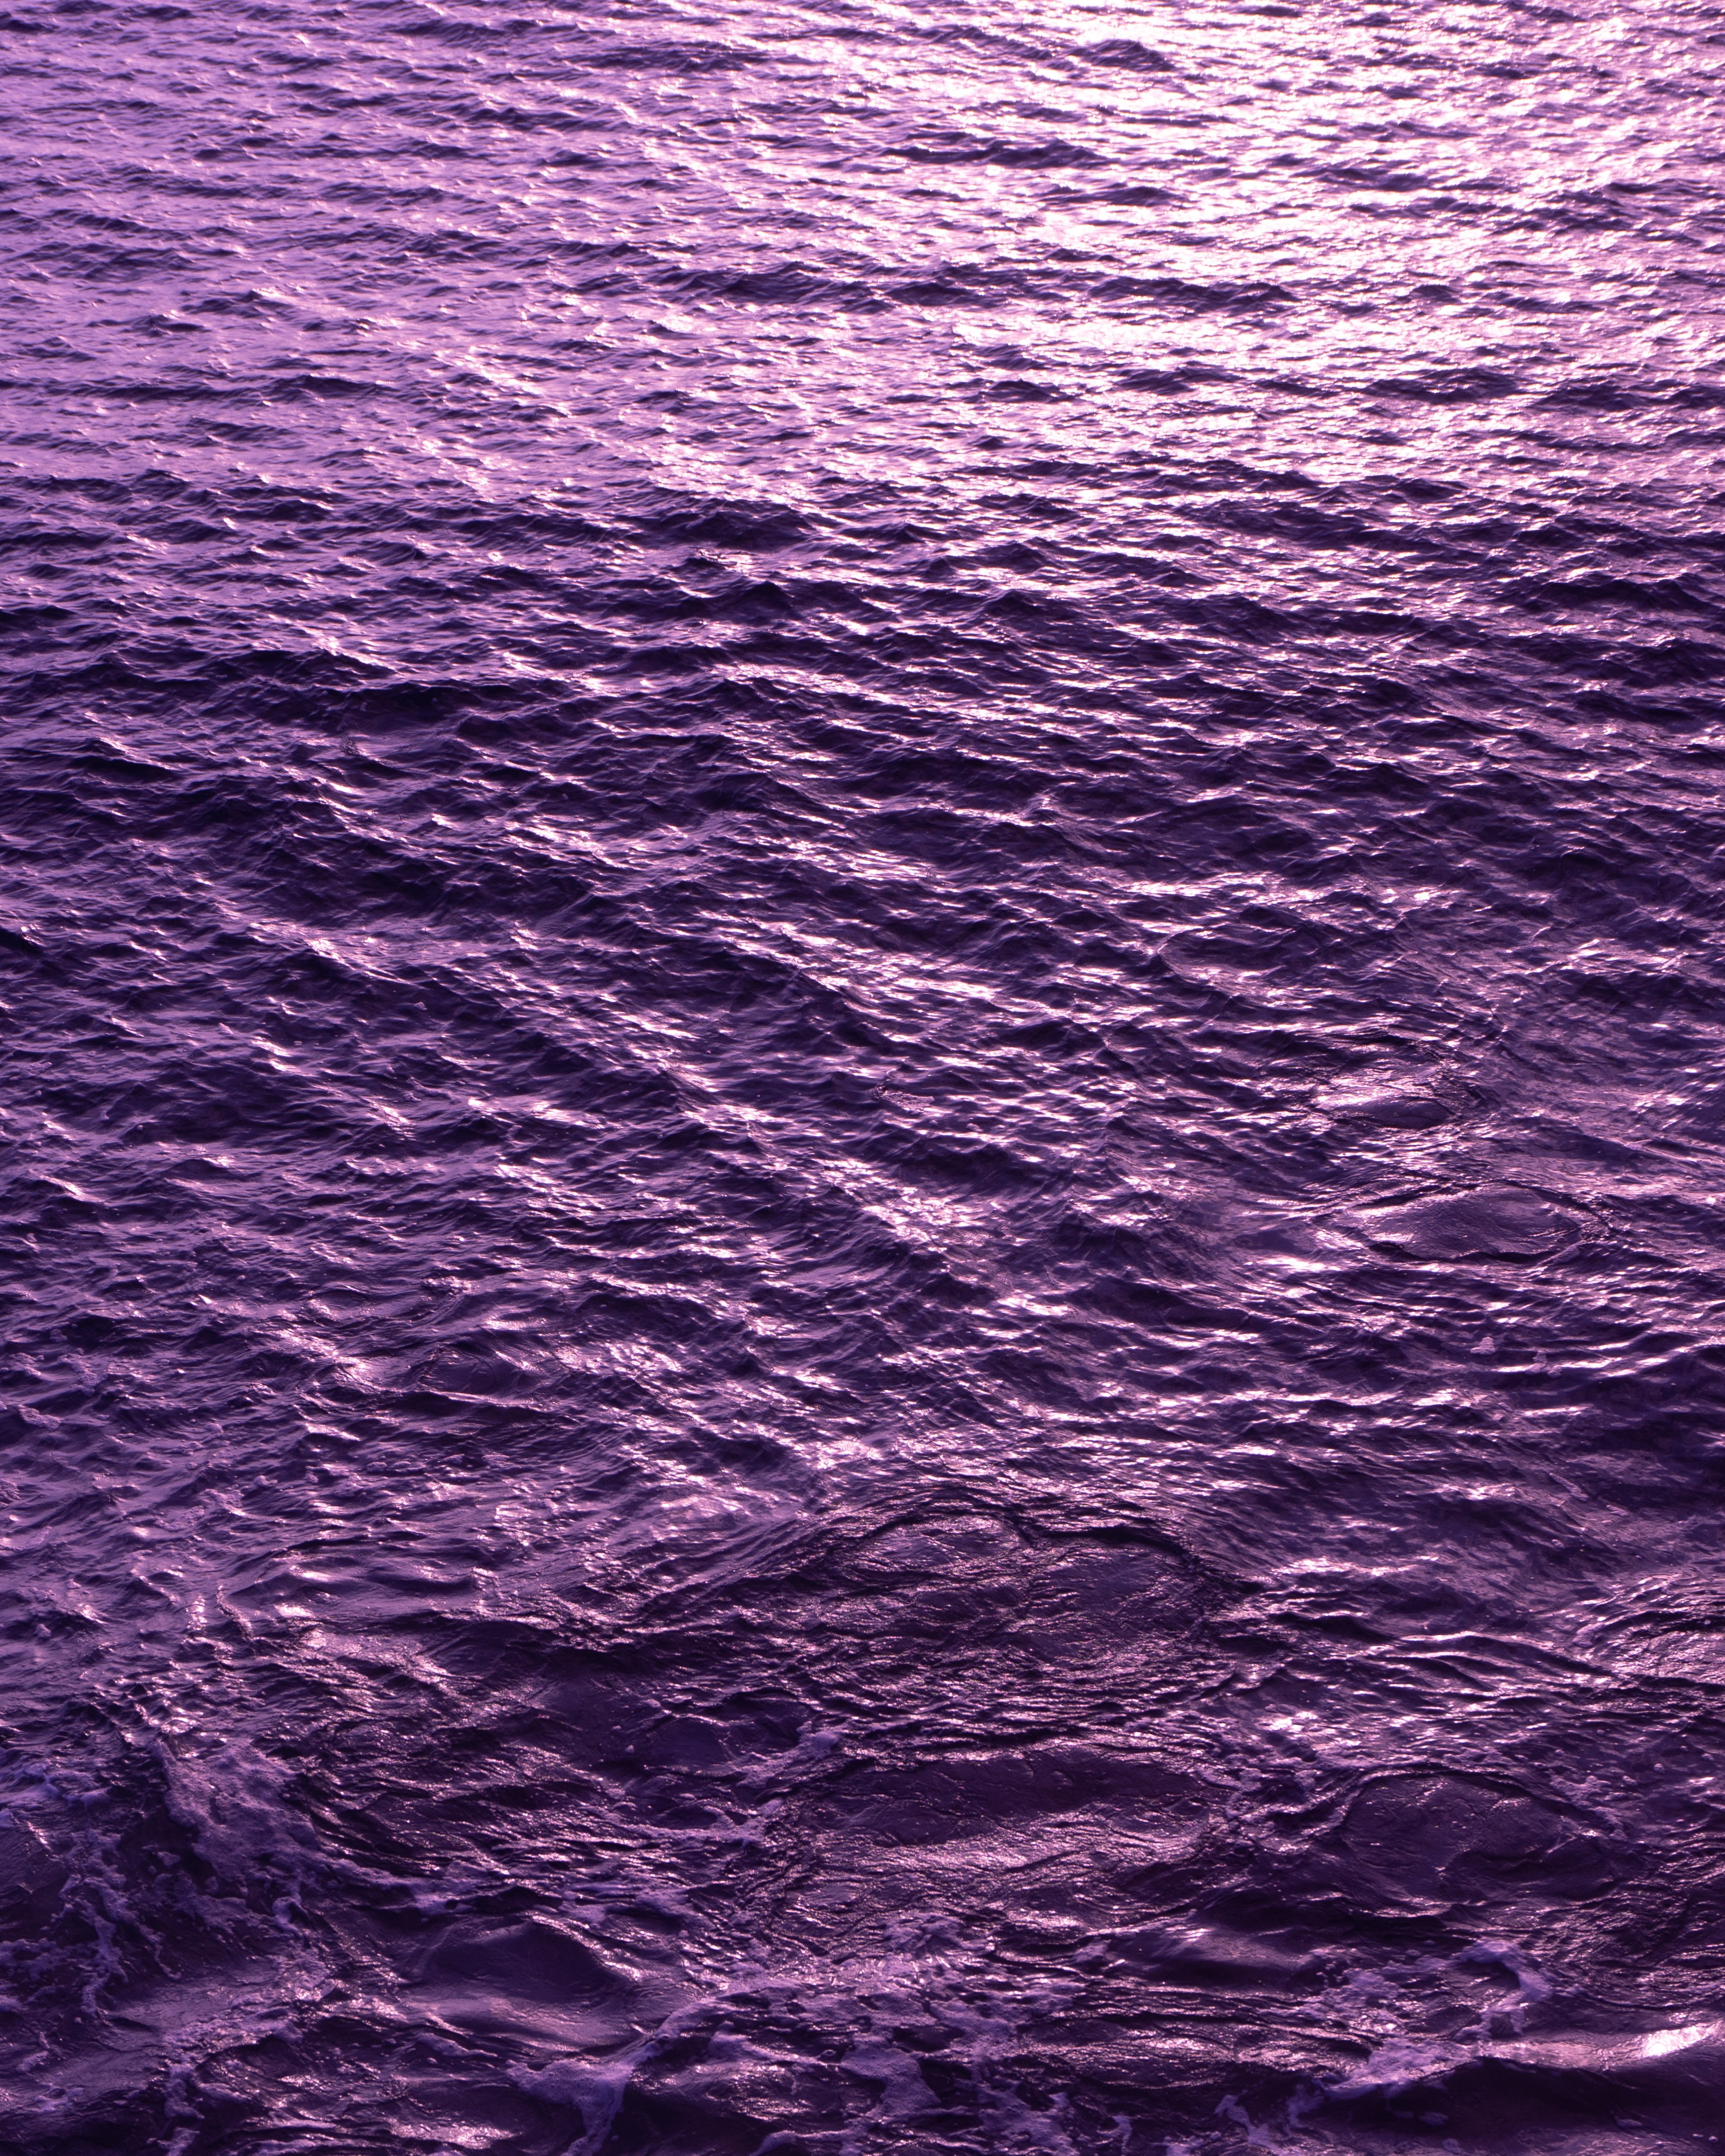 Free HD purple, surface, water, nature, waves, violet, ripples, ripple